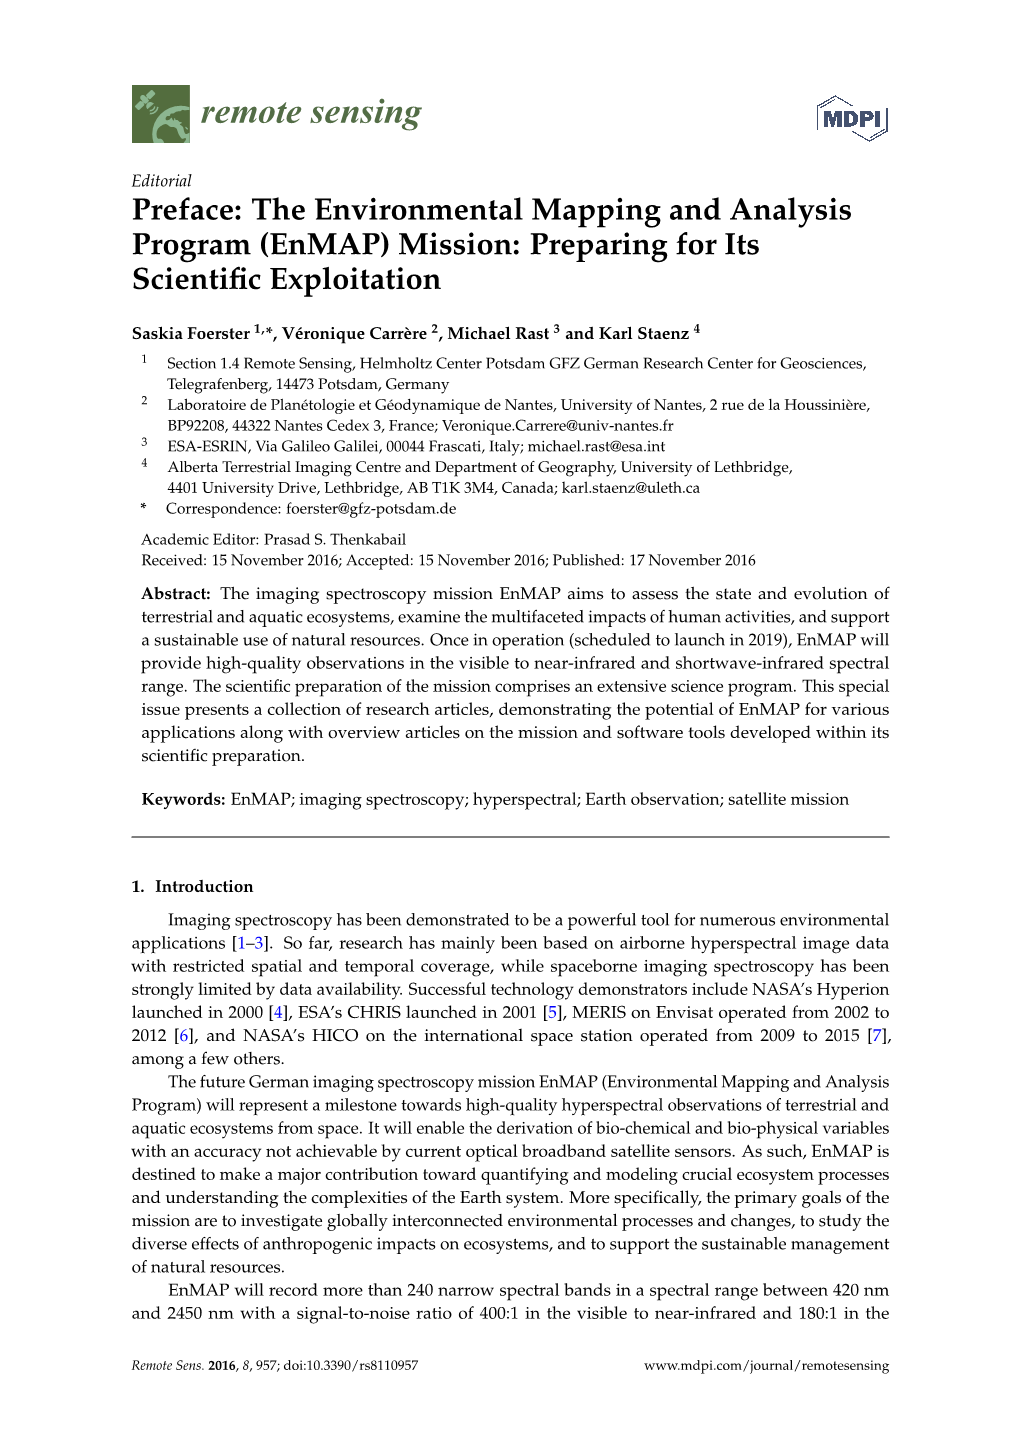 The Environmental Mapping and Analysis Program (Enmap) Mission: Preparing for Its Scientiﬁc Exploitation